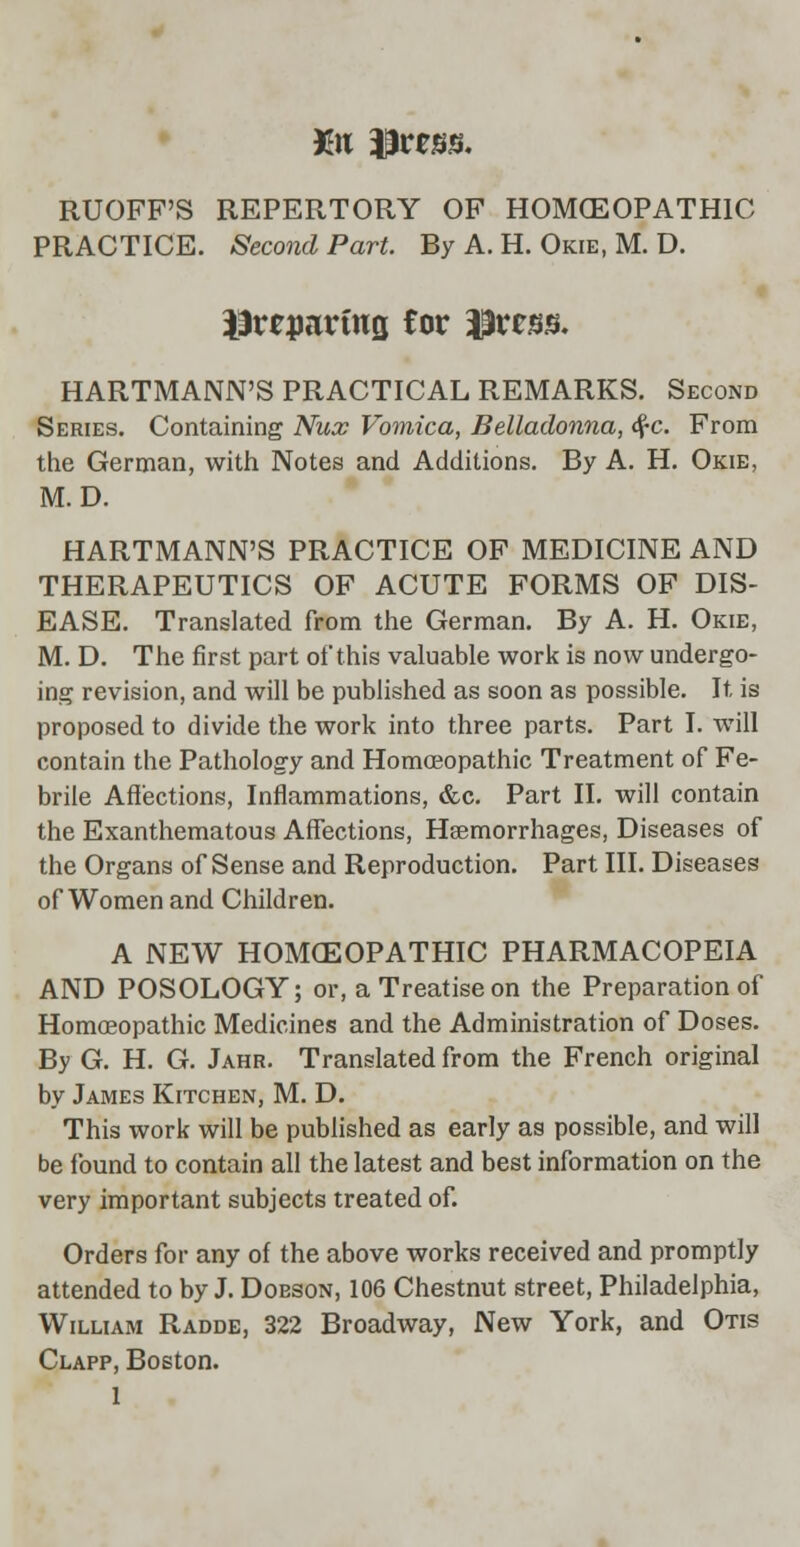 Kit press. RUOFF'S REPERTORY OP HOMCEOPATH1C PRACTICE. Second Part. By A. H. Okie, M. D. iirepartns Cor Press. HARTMANN'S PRACTICAL REMARKS. Second Series. Containing Nux Vomica, Belladonna, tf-c. From the German, with Notes and Additions. By A. H. Okie, M. D. HARTMANN'S PRACTICE OF MEDICINE AND THERAPEUTICS OF ACUTE FORMS OF DIS- EASE. Translated from the German. By A. H. Okie, M. D. The first part of*this valuable work is now undergo- ing revision, and will be published as soon as possible. It, is proposed to divide the work into three parts. Part I. will contain the Pathology and Homoeopathic Treatment of Fe- brile Affections, Inflammations, &c. Part II. will contain the Exanthematous Affections, Hemorrhages, Diseases of the Organs of Sense and Reproduction. Part III. Diseases of Women and Children. A NEW HOMOEOPATHIC PHARMACOPEIA AND POSOLOGY; or, a Treatise on the Preparation of Homoeopathic Medicines and the Administration of Doses. By G. H. G. Jahr. Translated from the French original by James Kitchen, M. D. This work will be published as early as possible, and will be found to contain all the latest and best information on the very important subjects treated of. Orders for any of the above works received and promptly attended to by J. Doeson, 106 Chestnut street, Philadelphia, William Radde, 322 Broadway, New York, and Otis Clapp, Boston.